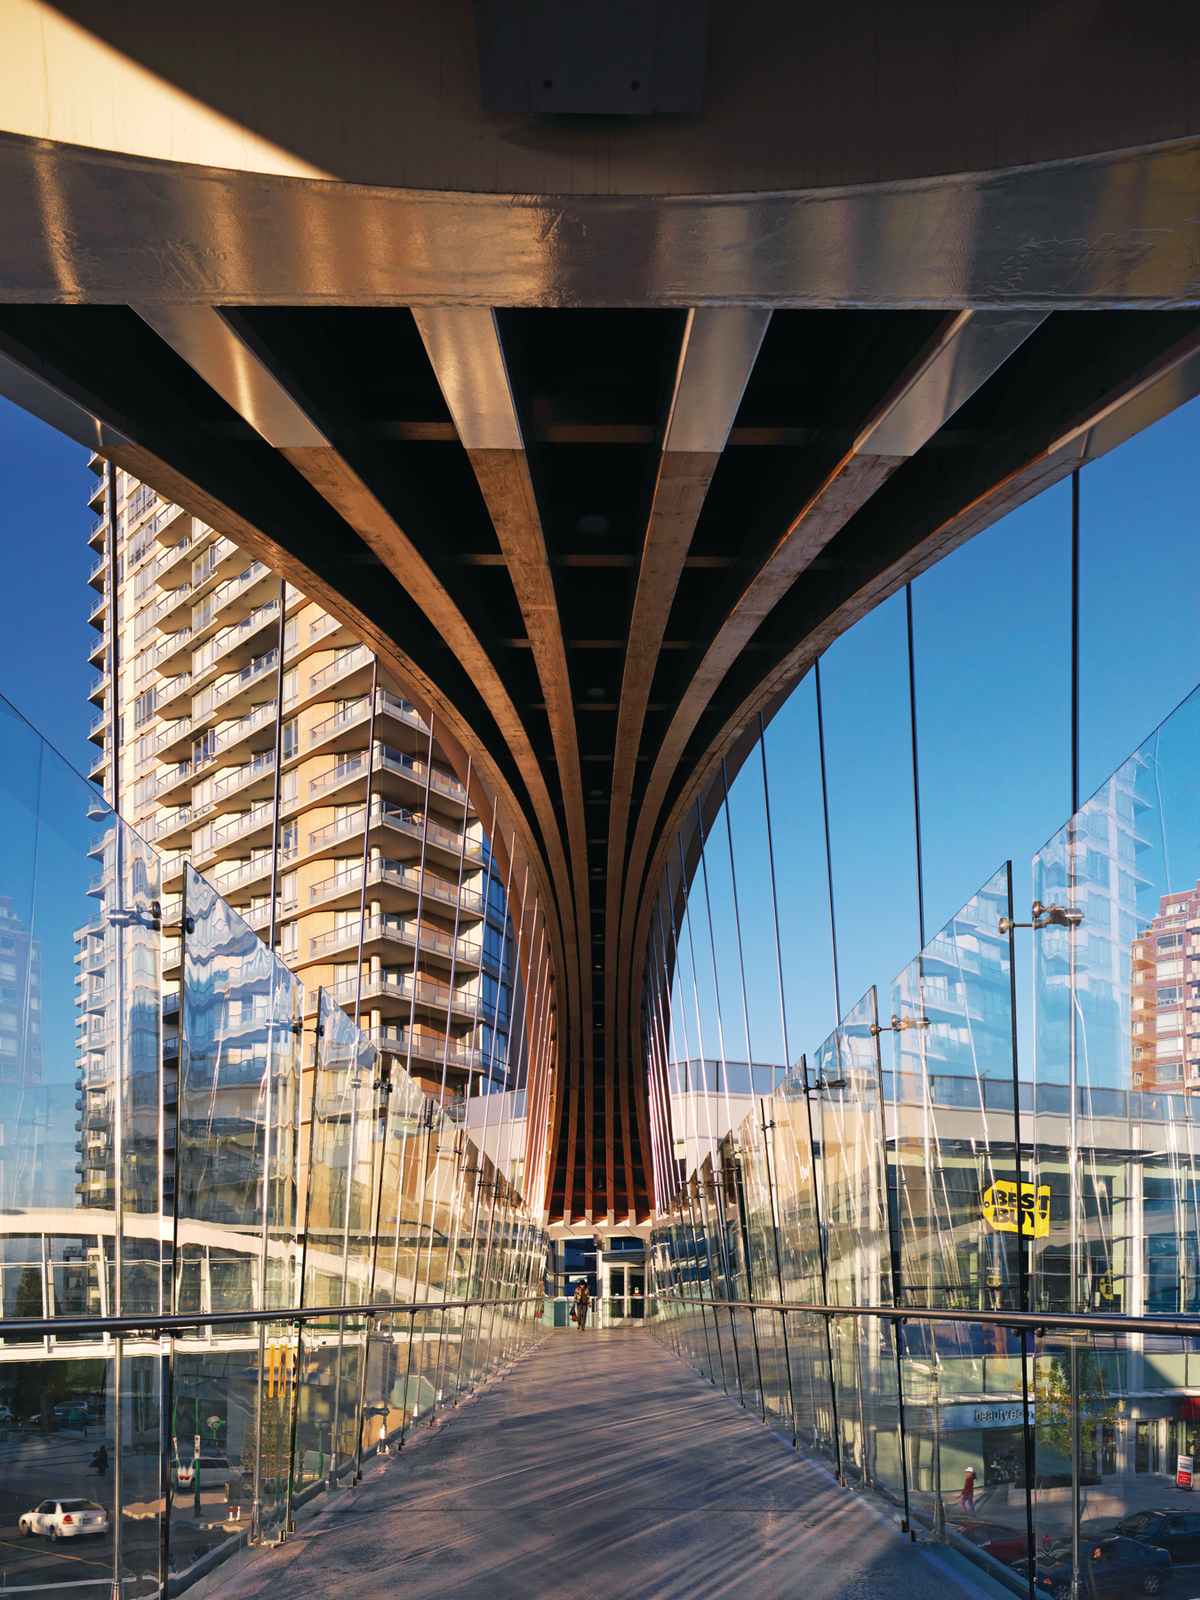 Exterior daytime view from deck of Kingsway Pedestrian Bridge, showing double-curved glue-laminated timber (glulam) arch above, with walkway suspended by steel cables below